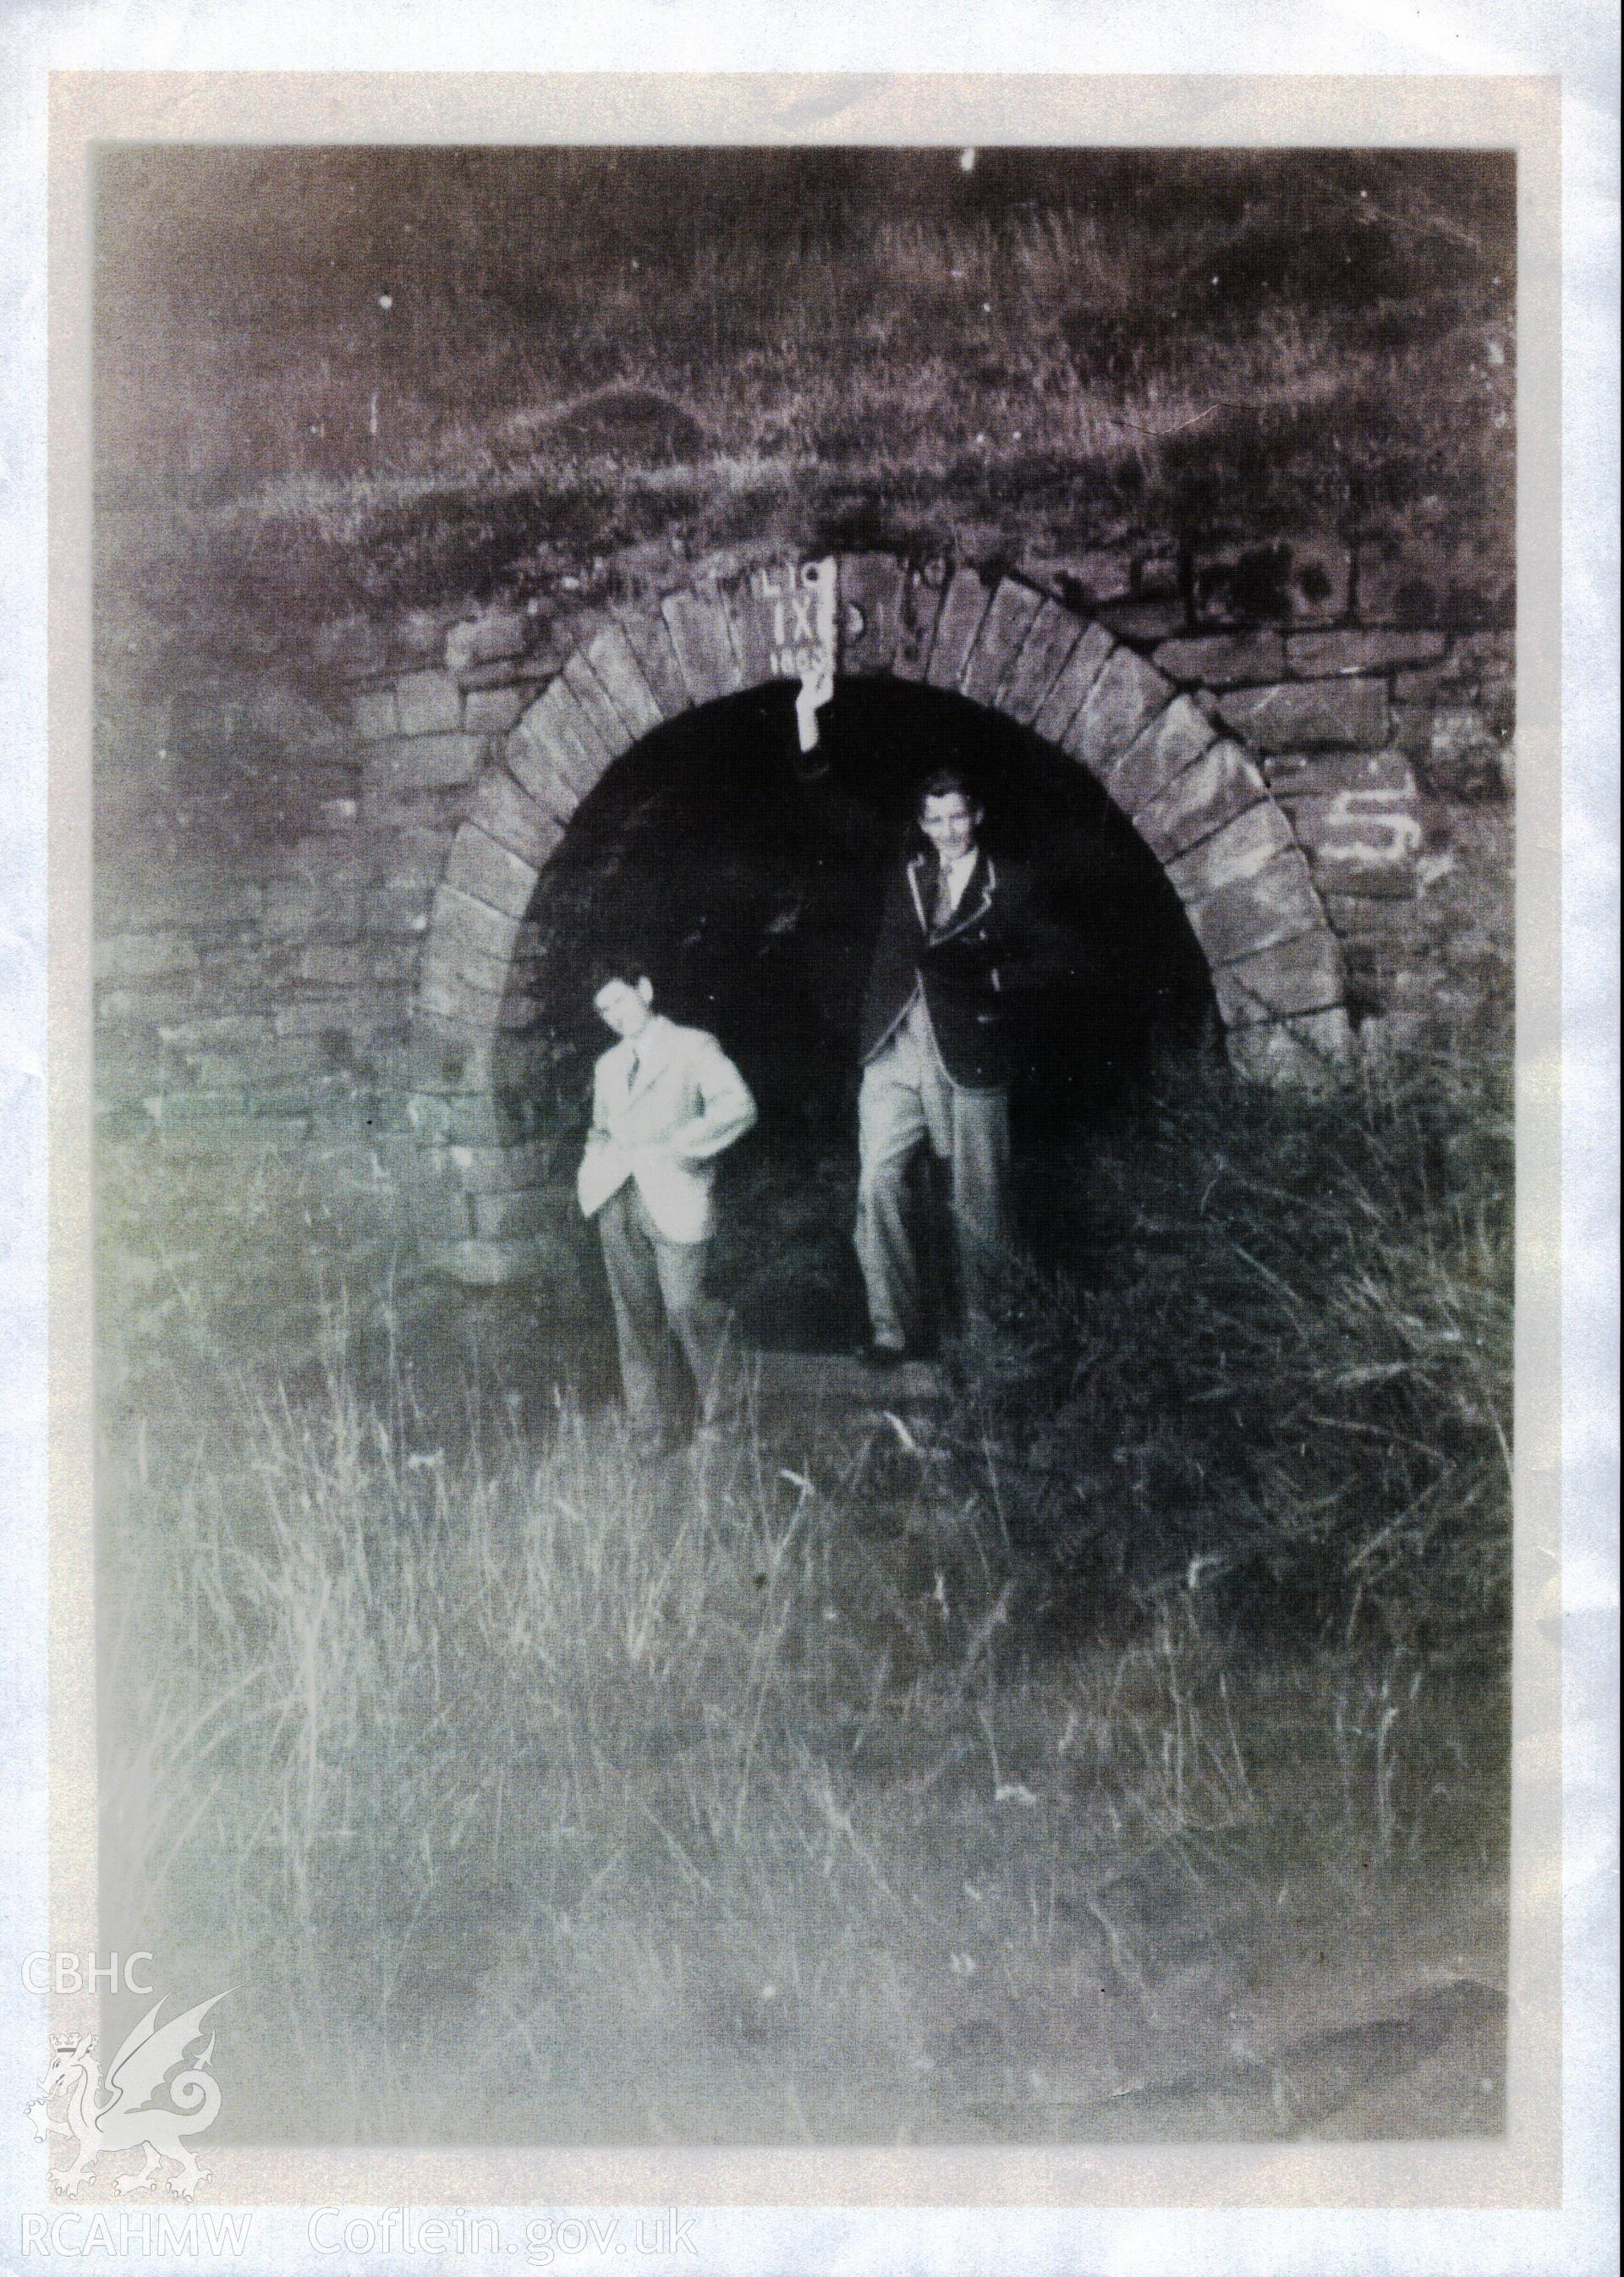 Black and white photograph of Gareth Rees and Ronald Austin of Porthcawl, taken at no. 9 Level above Maesteg cemetery. Donated to the RCAHMW by Cyril Philips as part of the Digital Dissent Project.